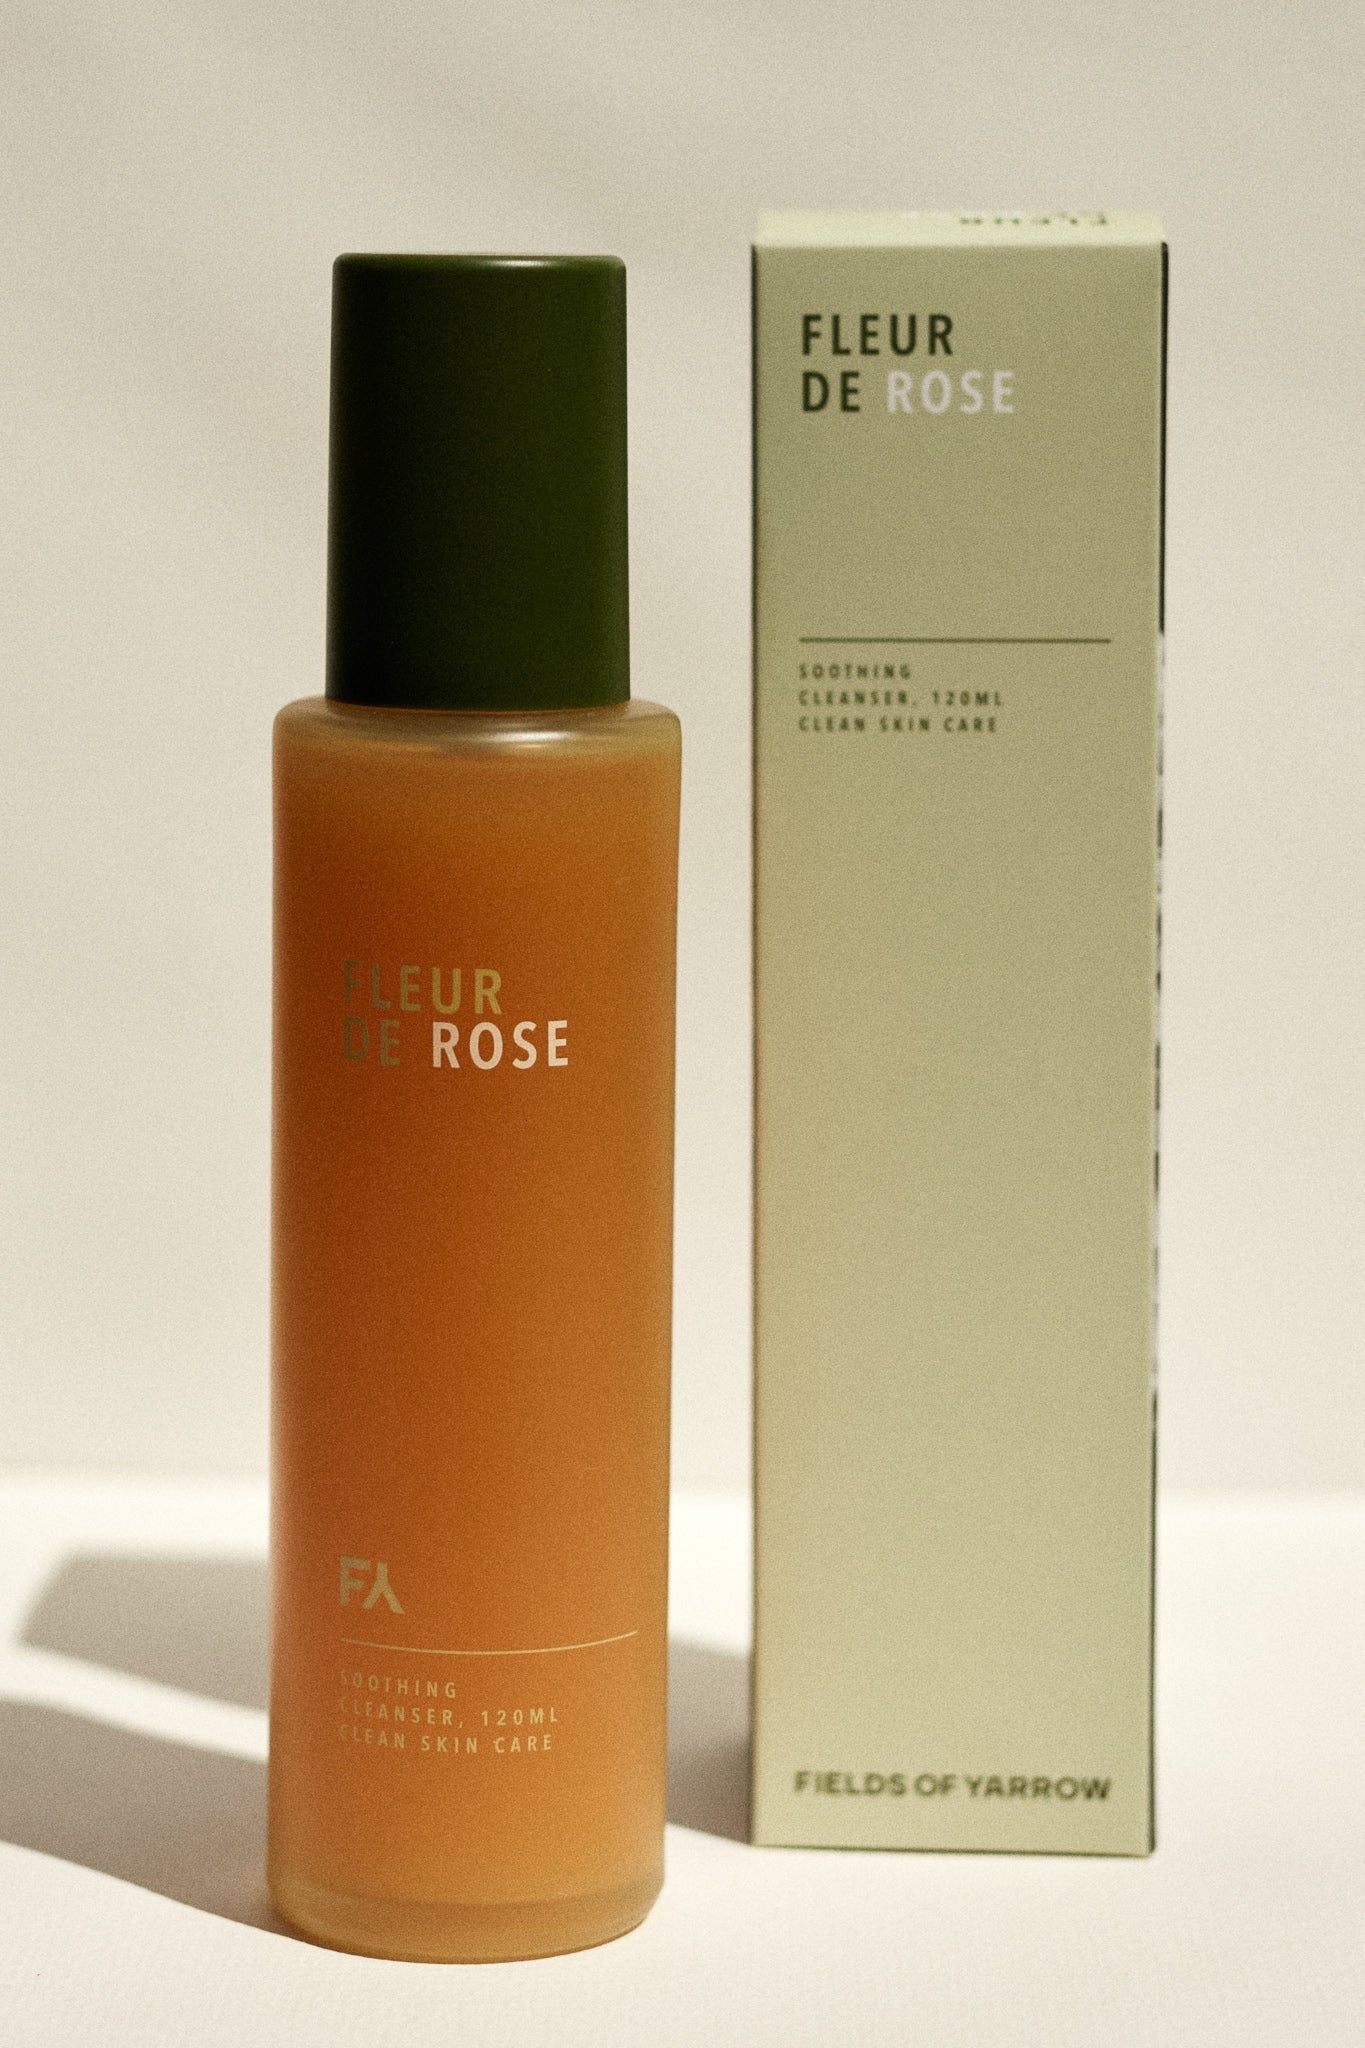 Fleur de Rose Soothing Cleanser by Fields of Yarrow next to its recycled paper packaging